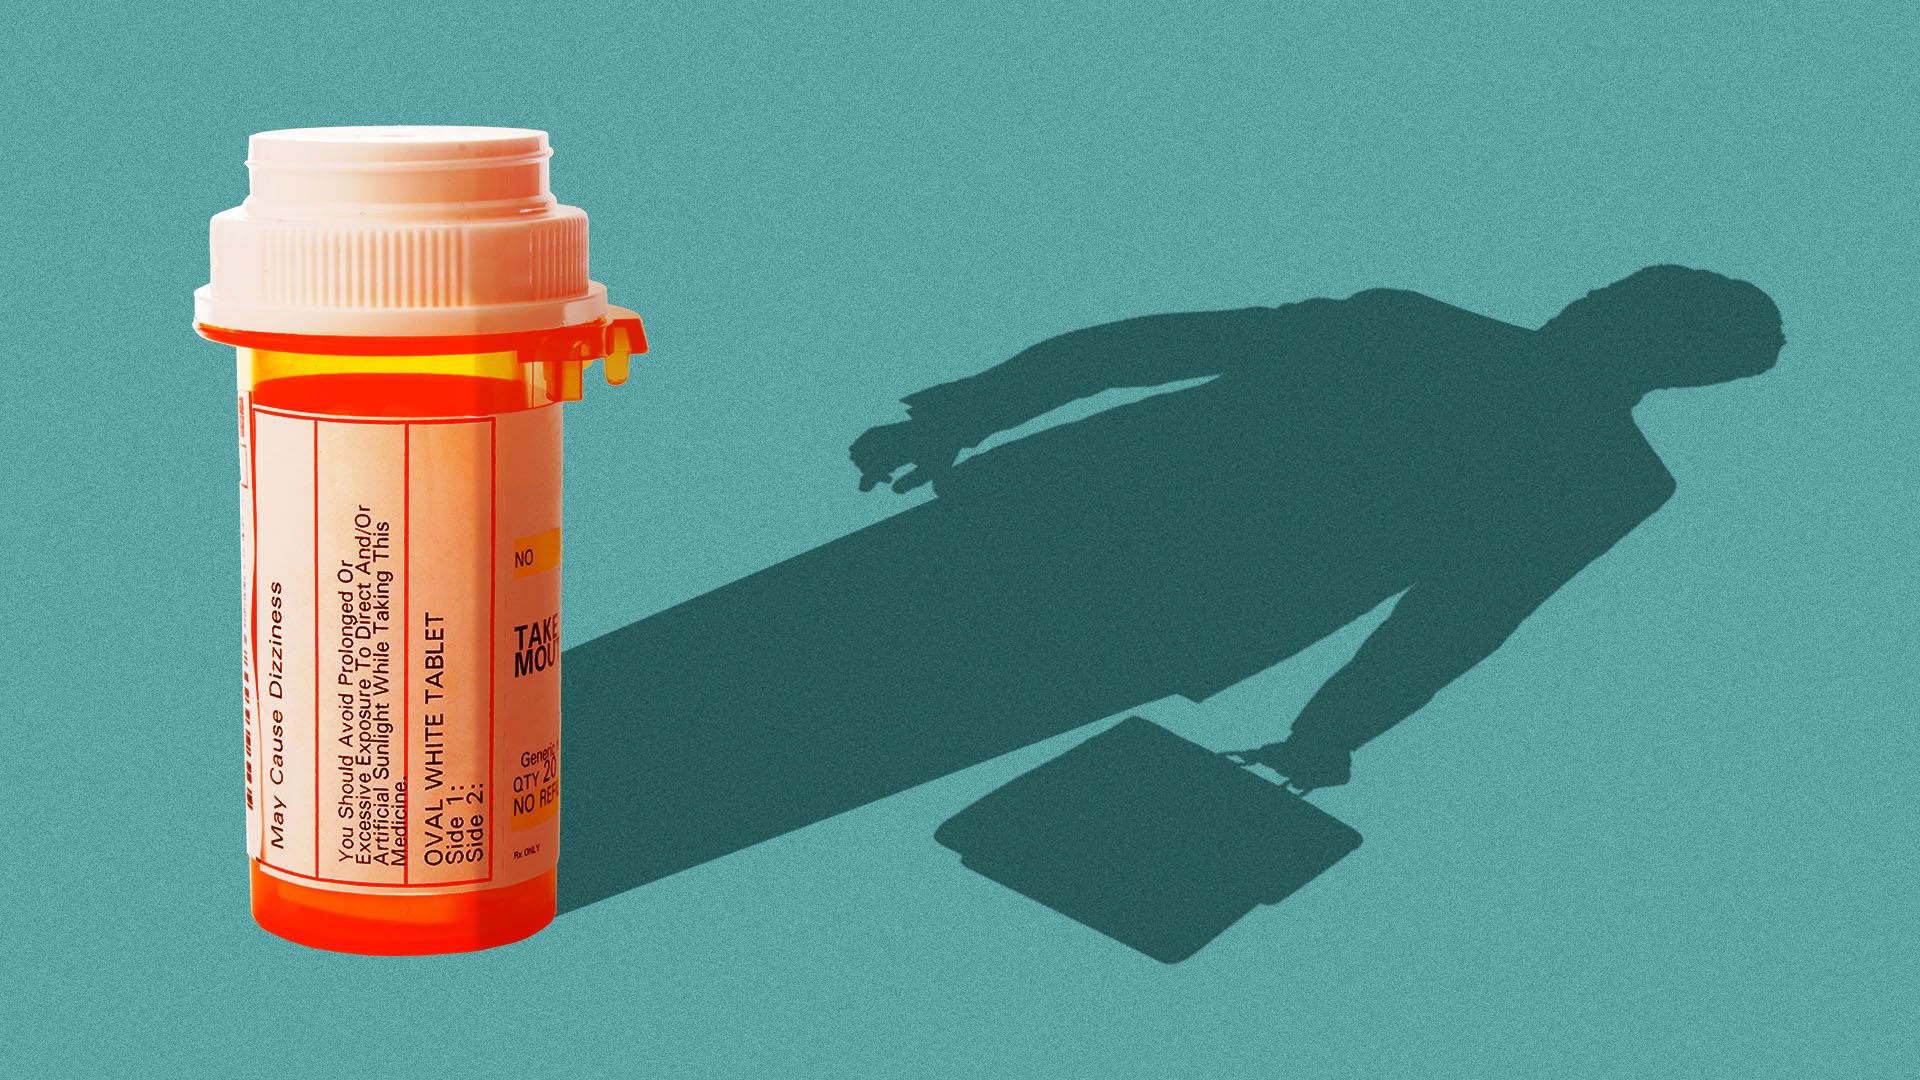 Illustration of a pill bottle casting a shadow of a businessman